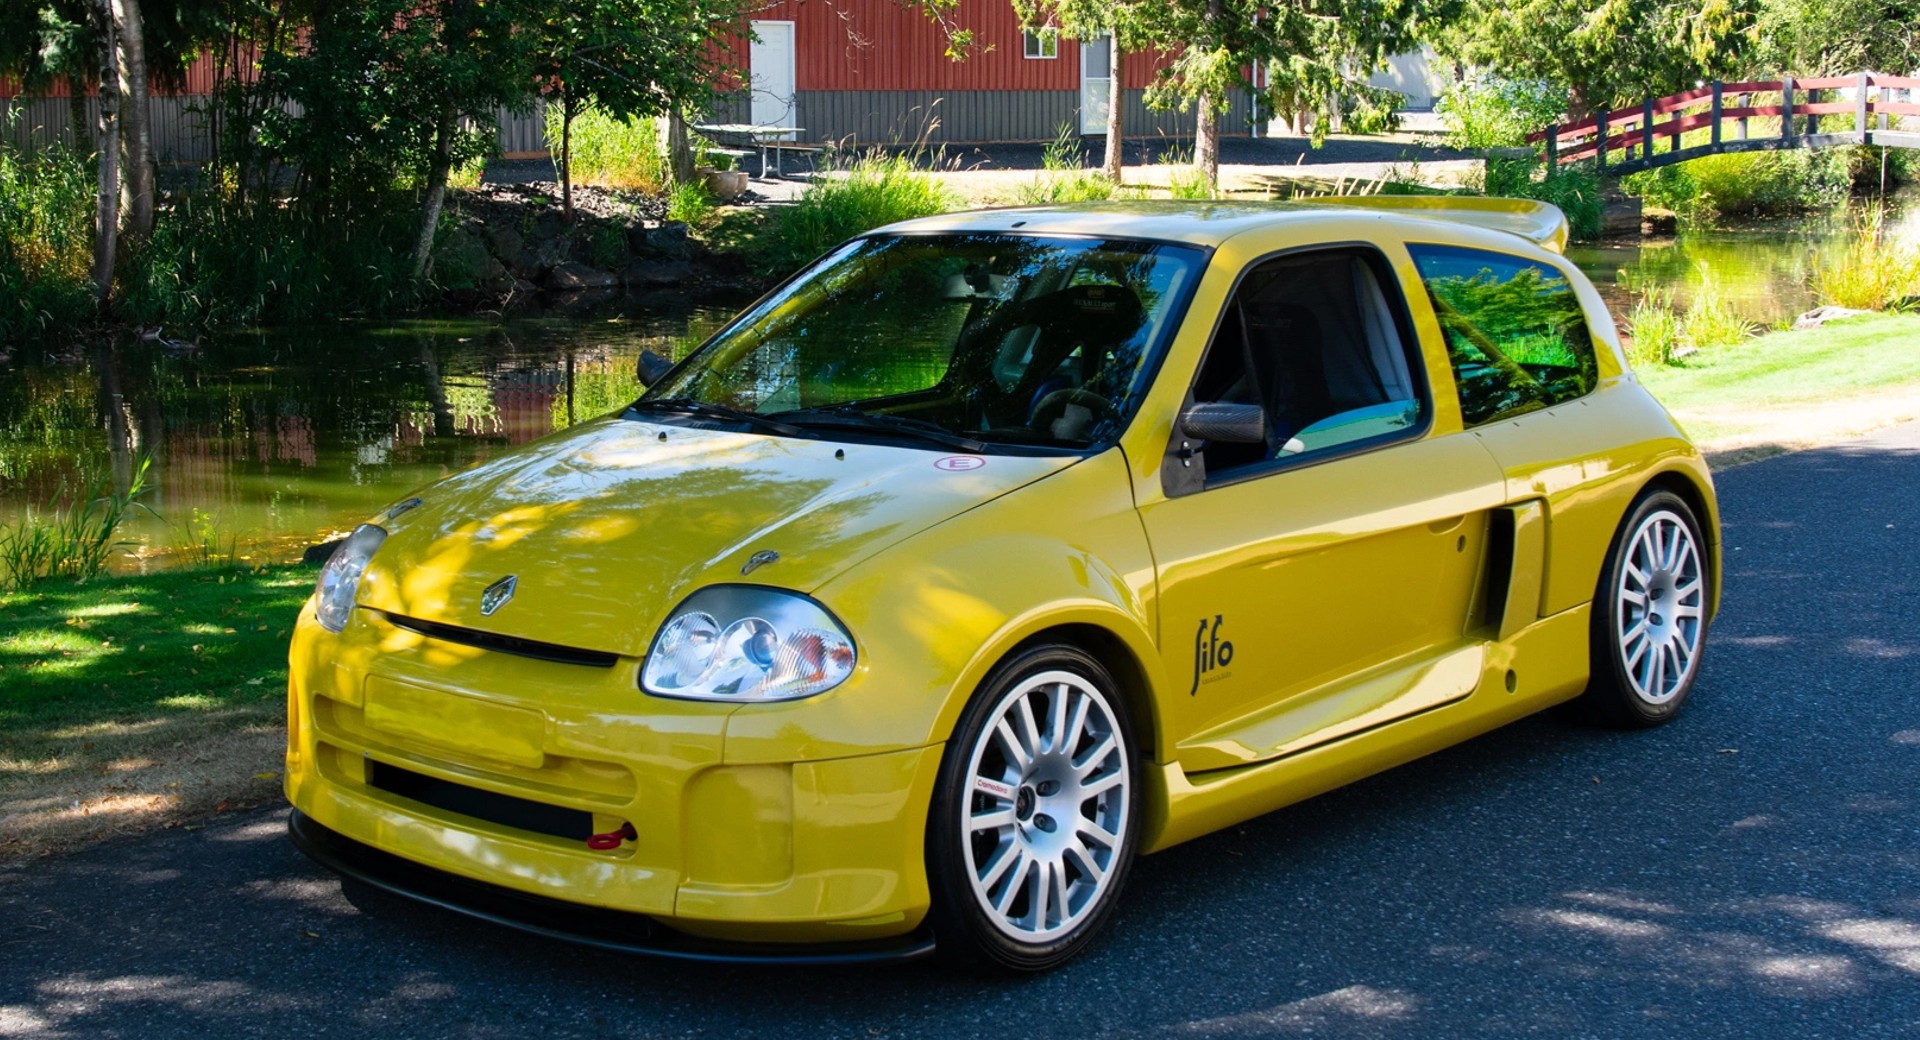 Here's Your Chance To Own Super-Rare Renault Clio V6 Trophy Race Car That's Already In The U.S. | Carscoops